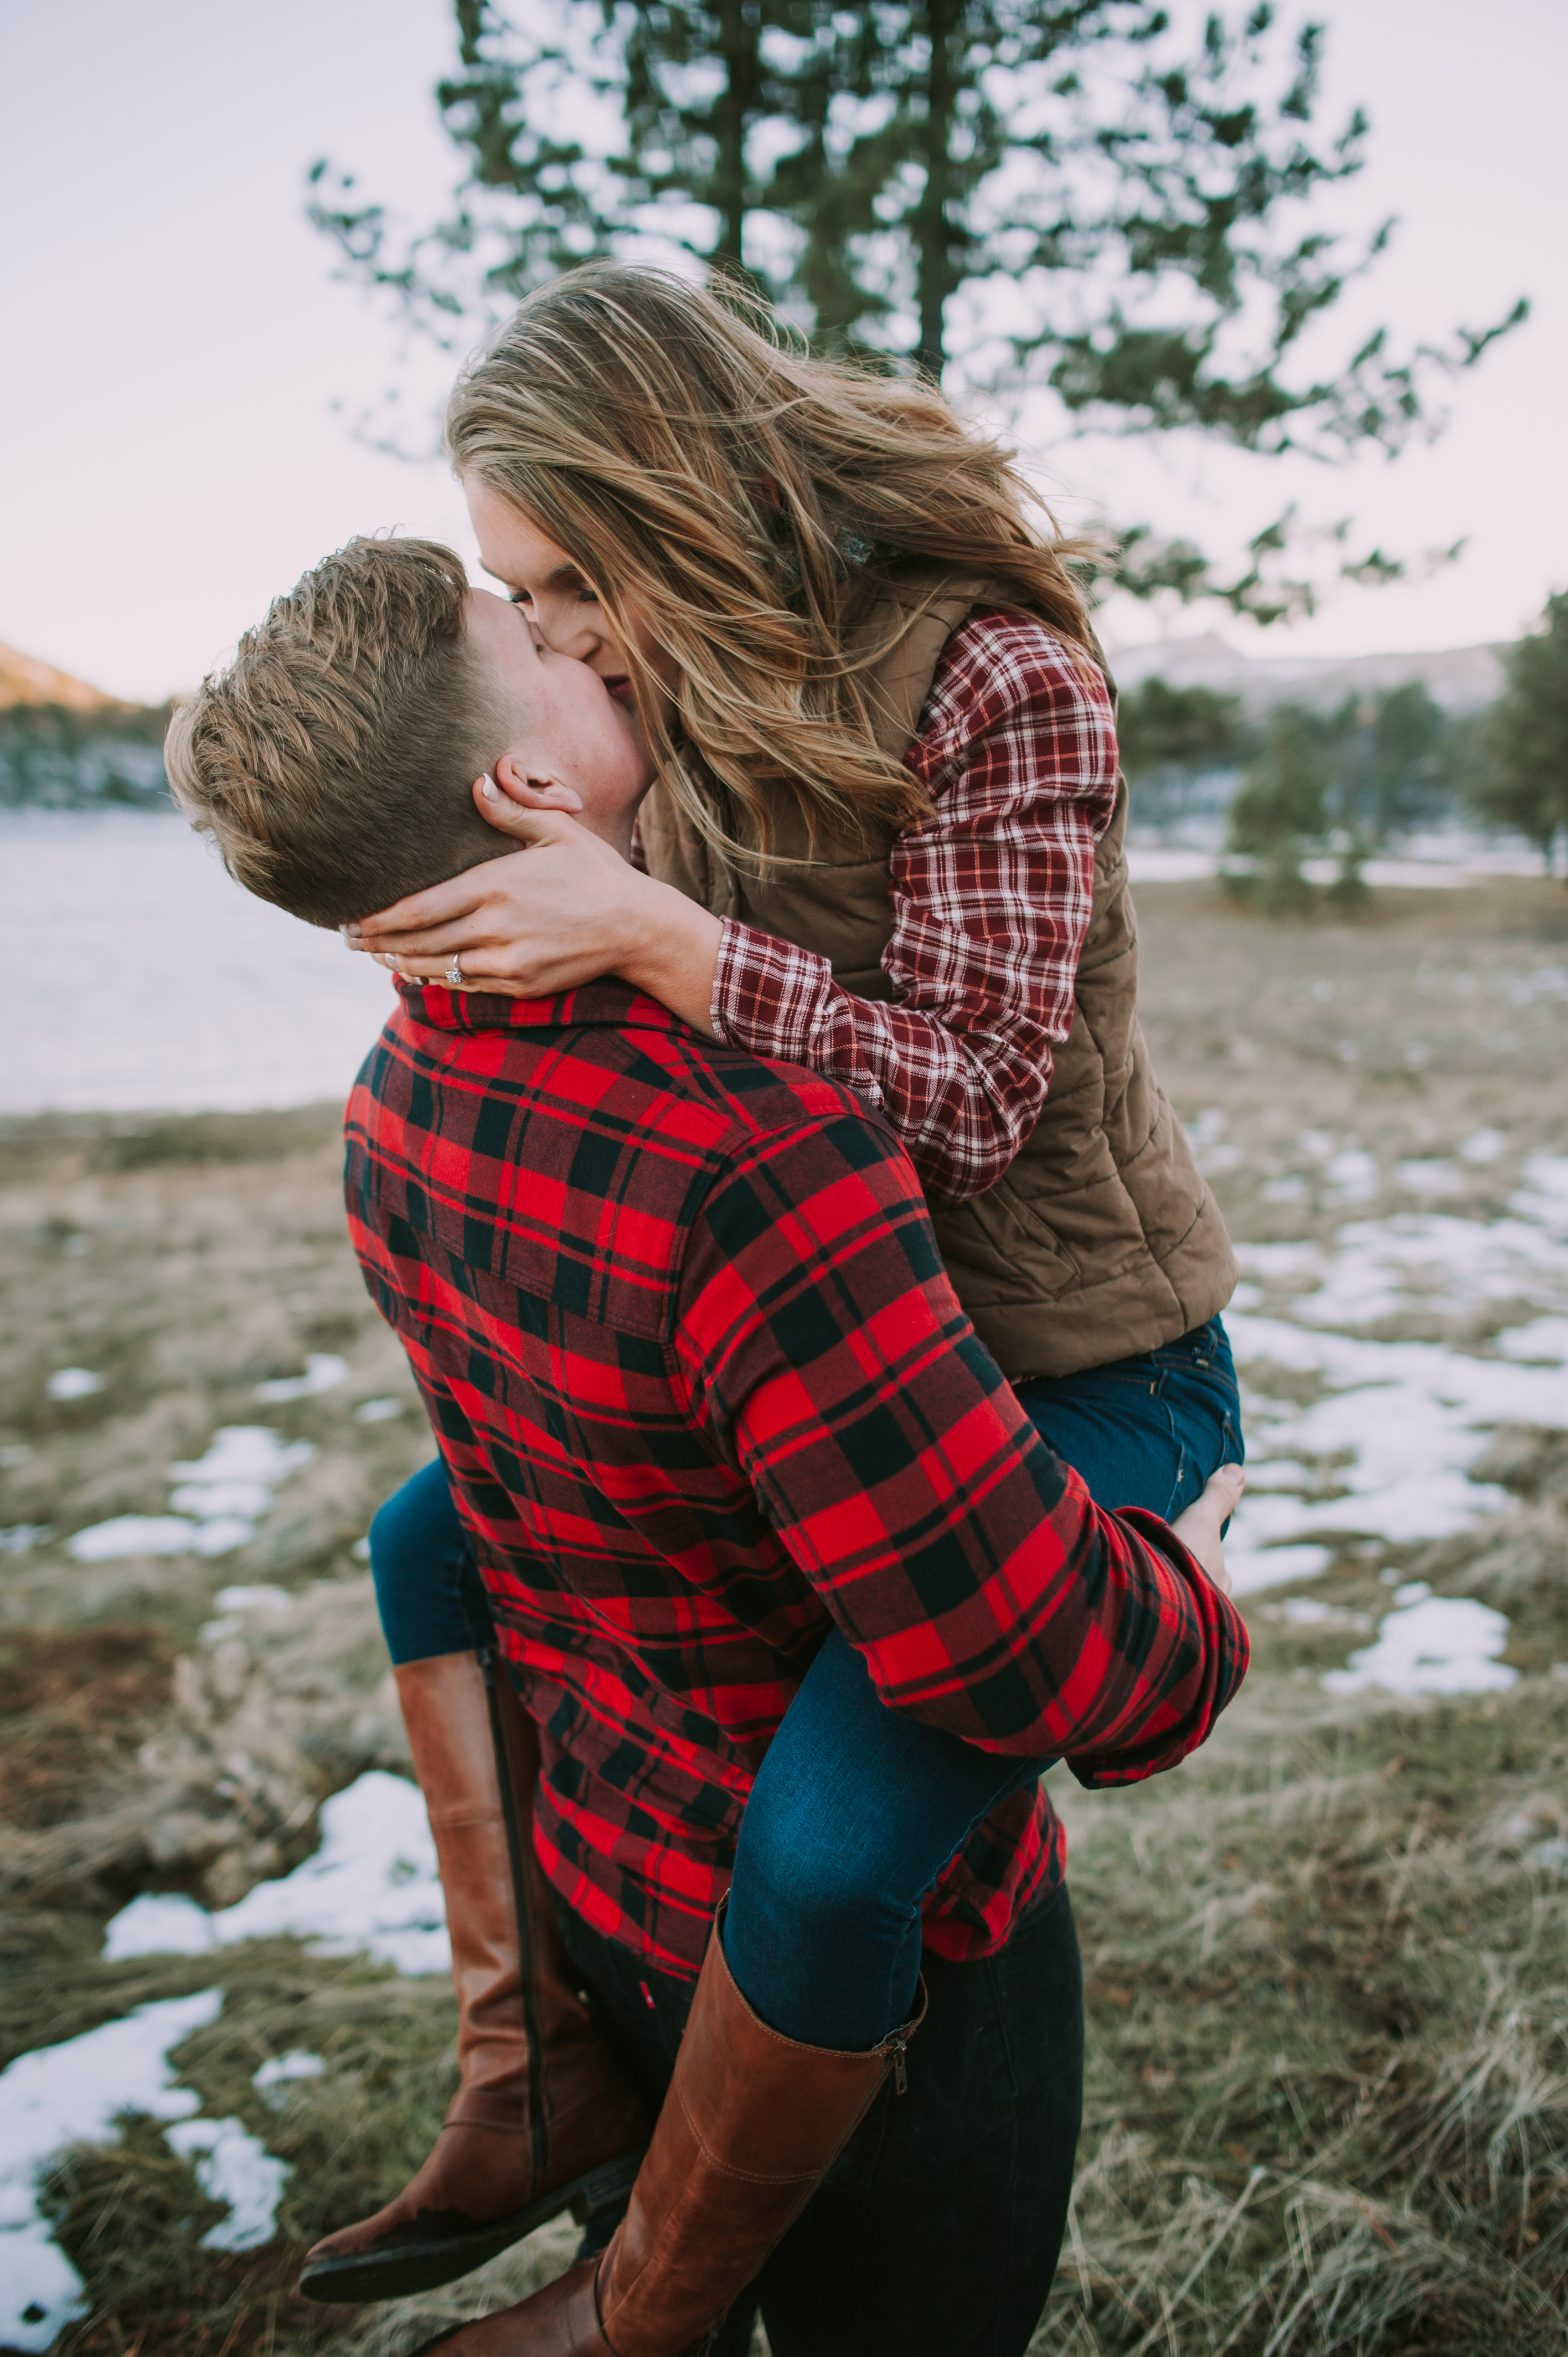 Winter and Plaid Engagement Session at Lake Cuyamaca by Kylie Rae Photography